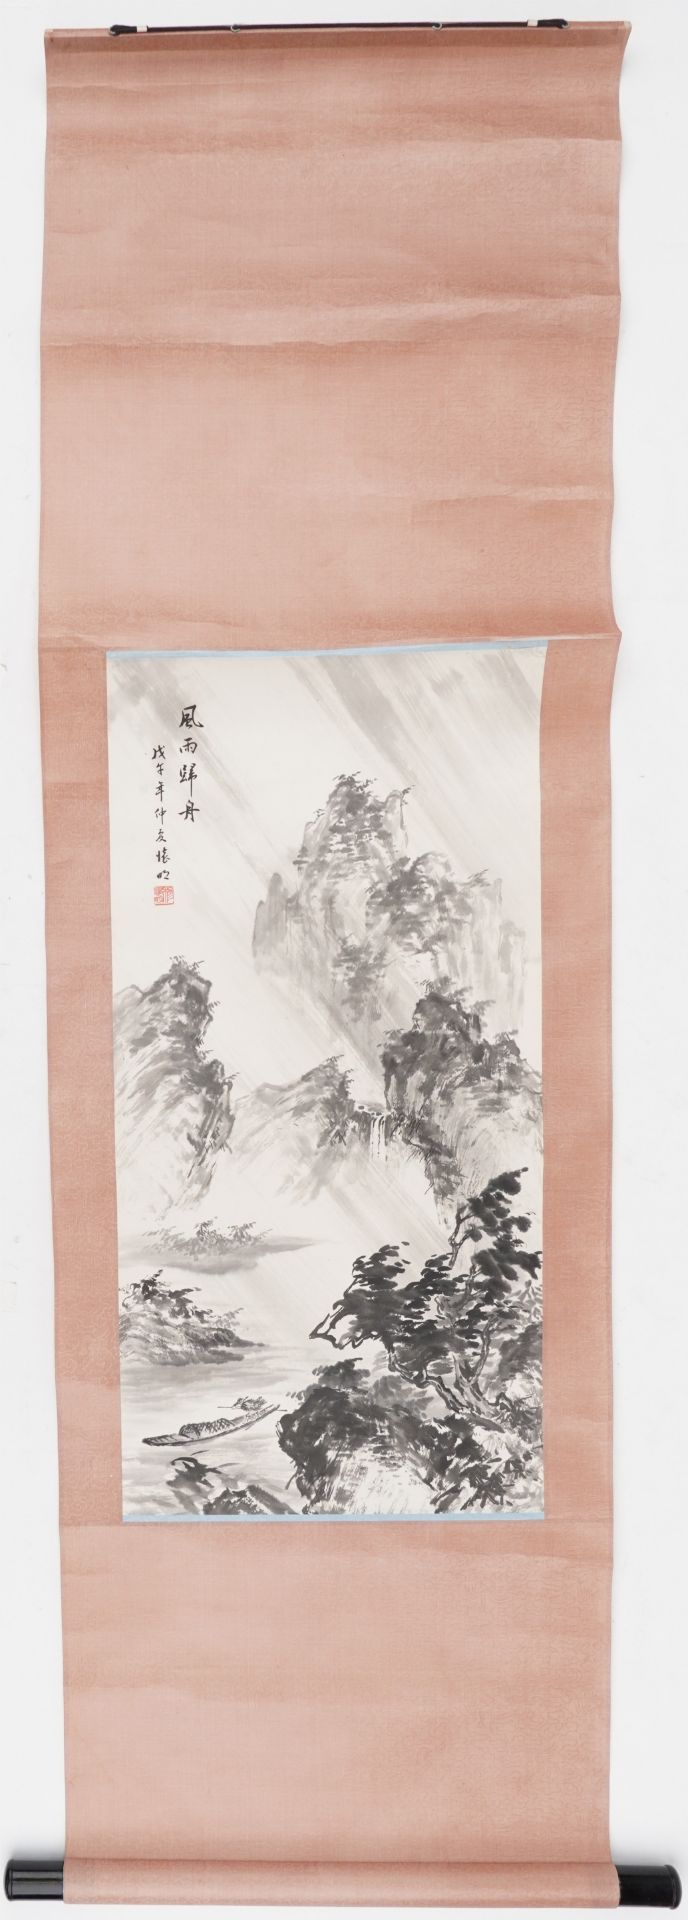 Chinese wall hanging scroll hand painted with a mountainous landscape, 68cm x 32cm - Image 4 of 10